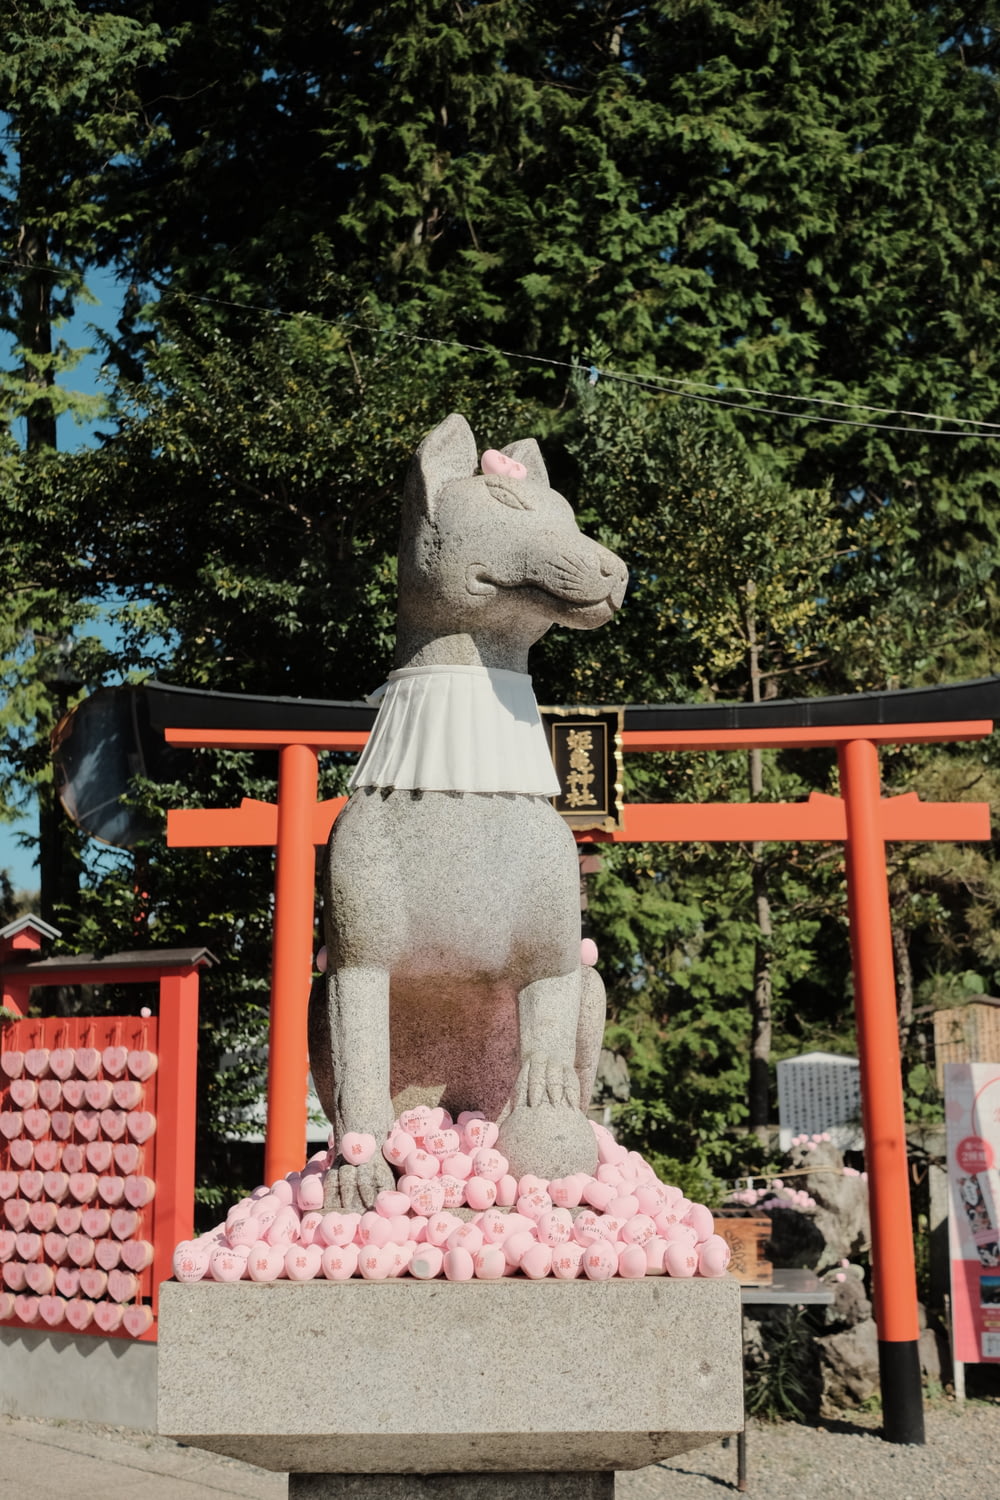 a statue of a dog with pink balls in front of it